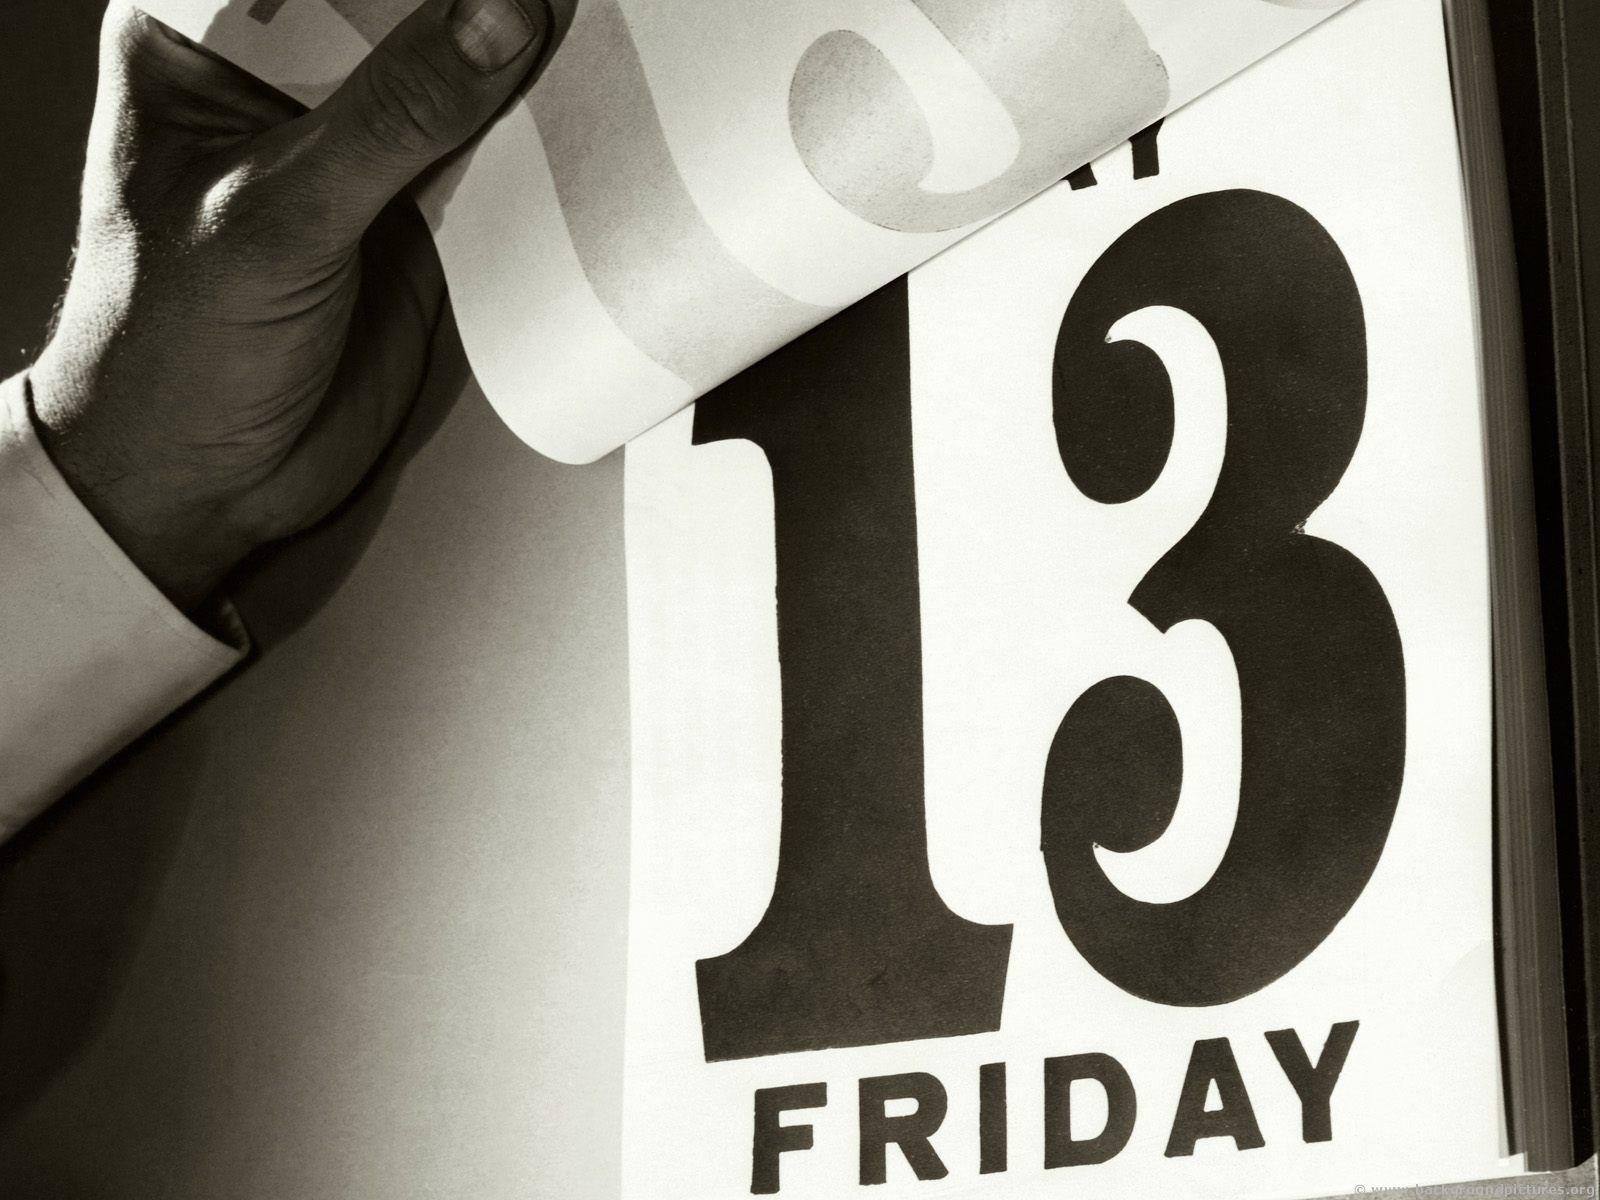 Friday 13 wallpaper and image, picture, photo